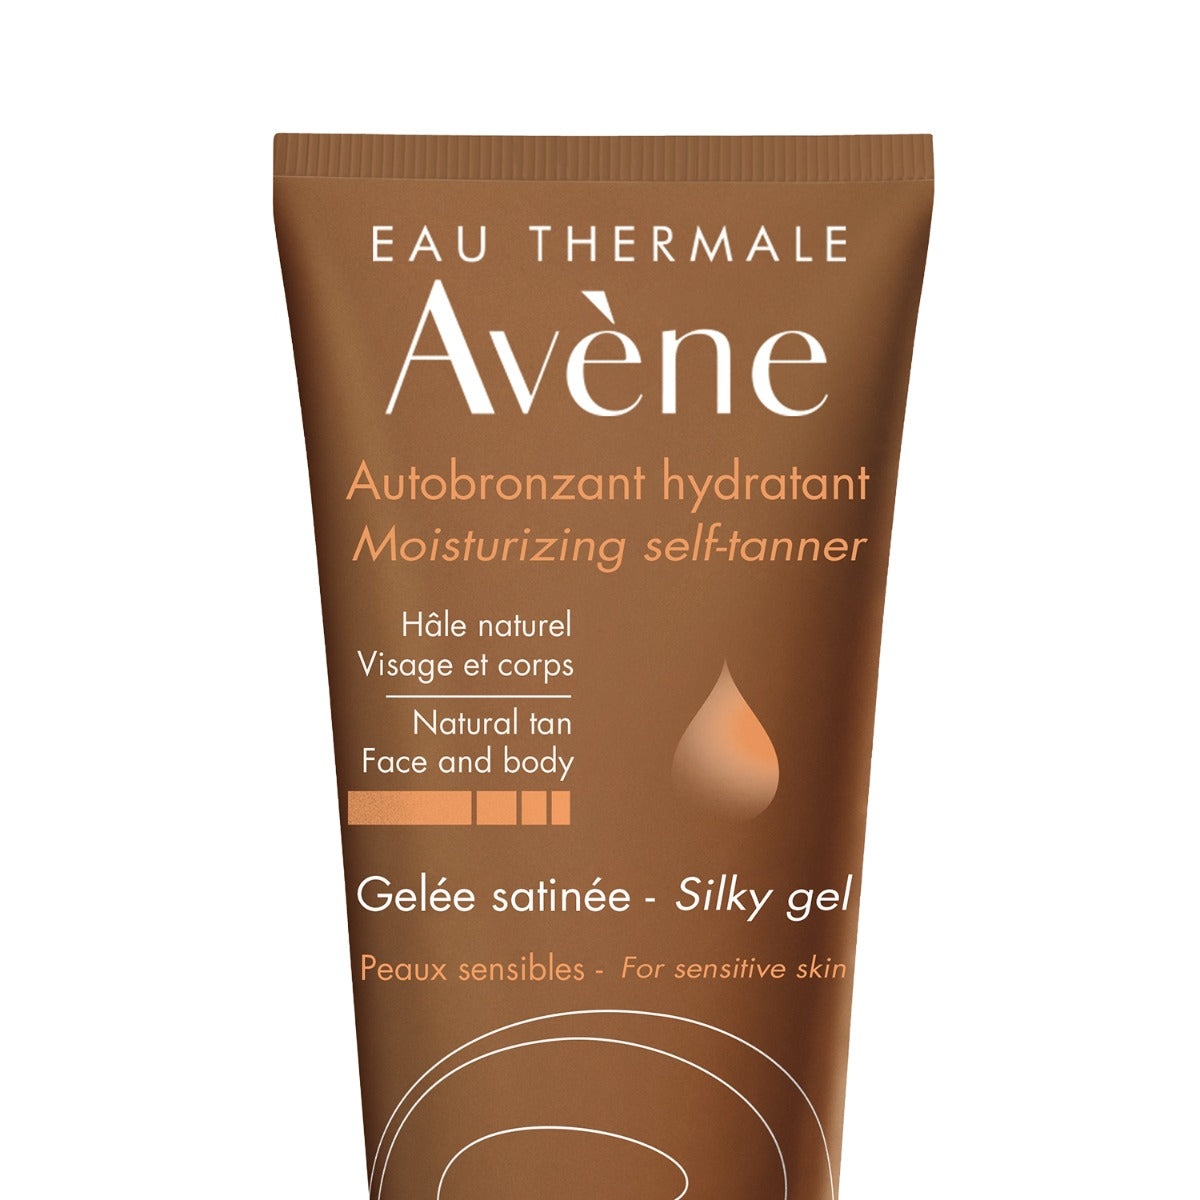 Avene Natural Shine Self Tanning: Get an Even and Radiant Tan in 3 Days